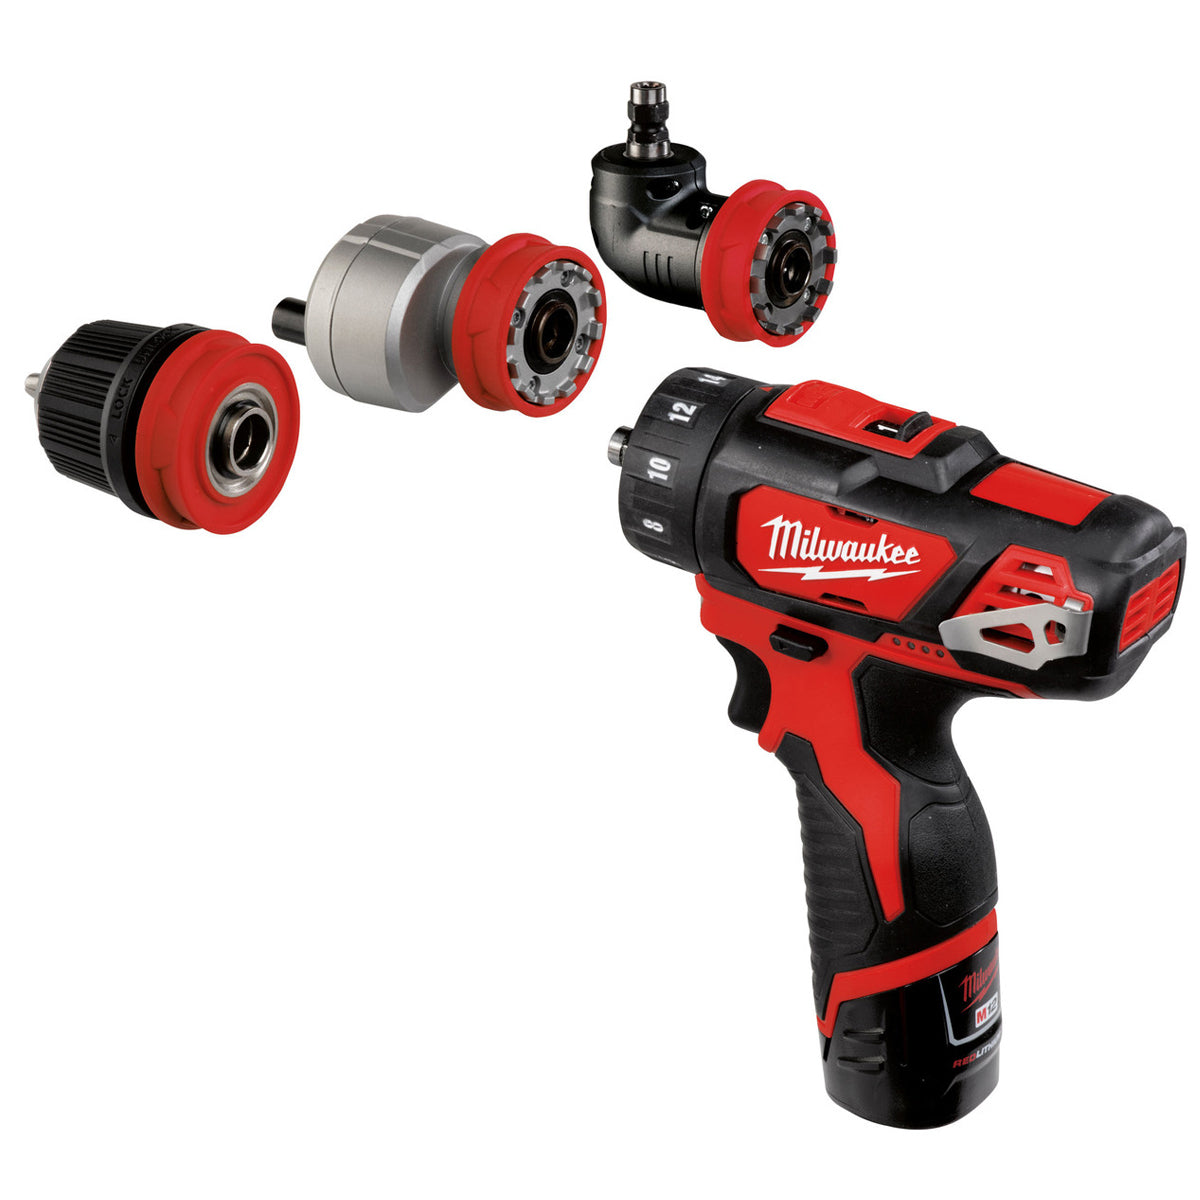 Milwaukee M12 BDDXKIT-202C 12V Drill Driver with 2 x 2.0Ah Batteries, Charger & Case 4933447773